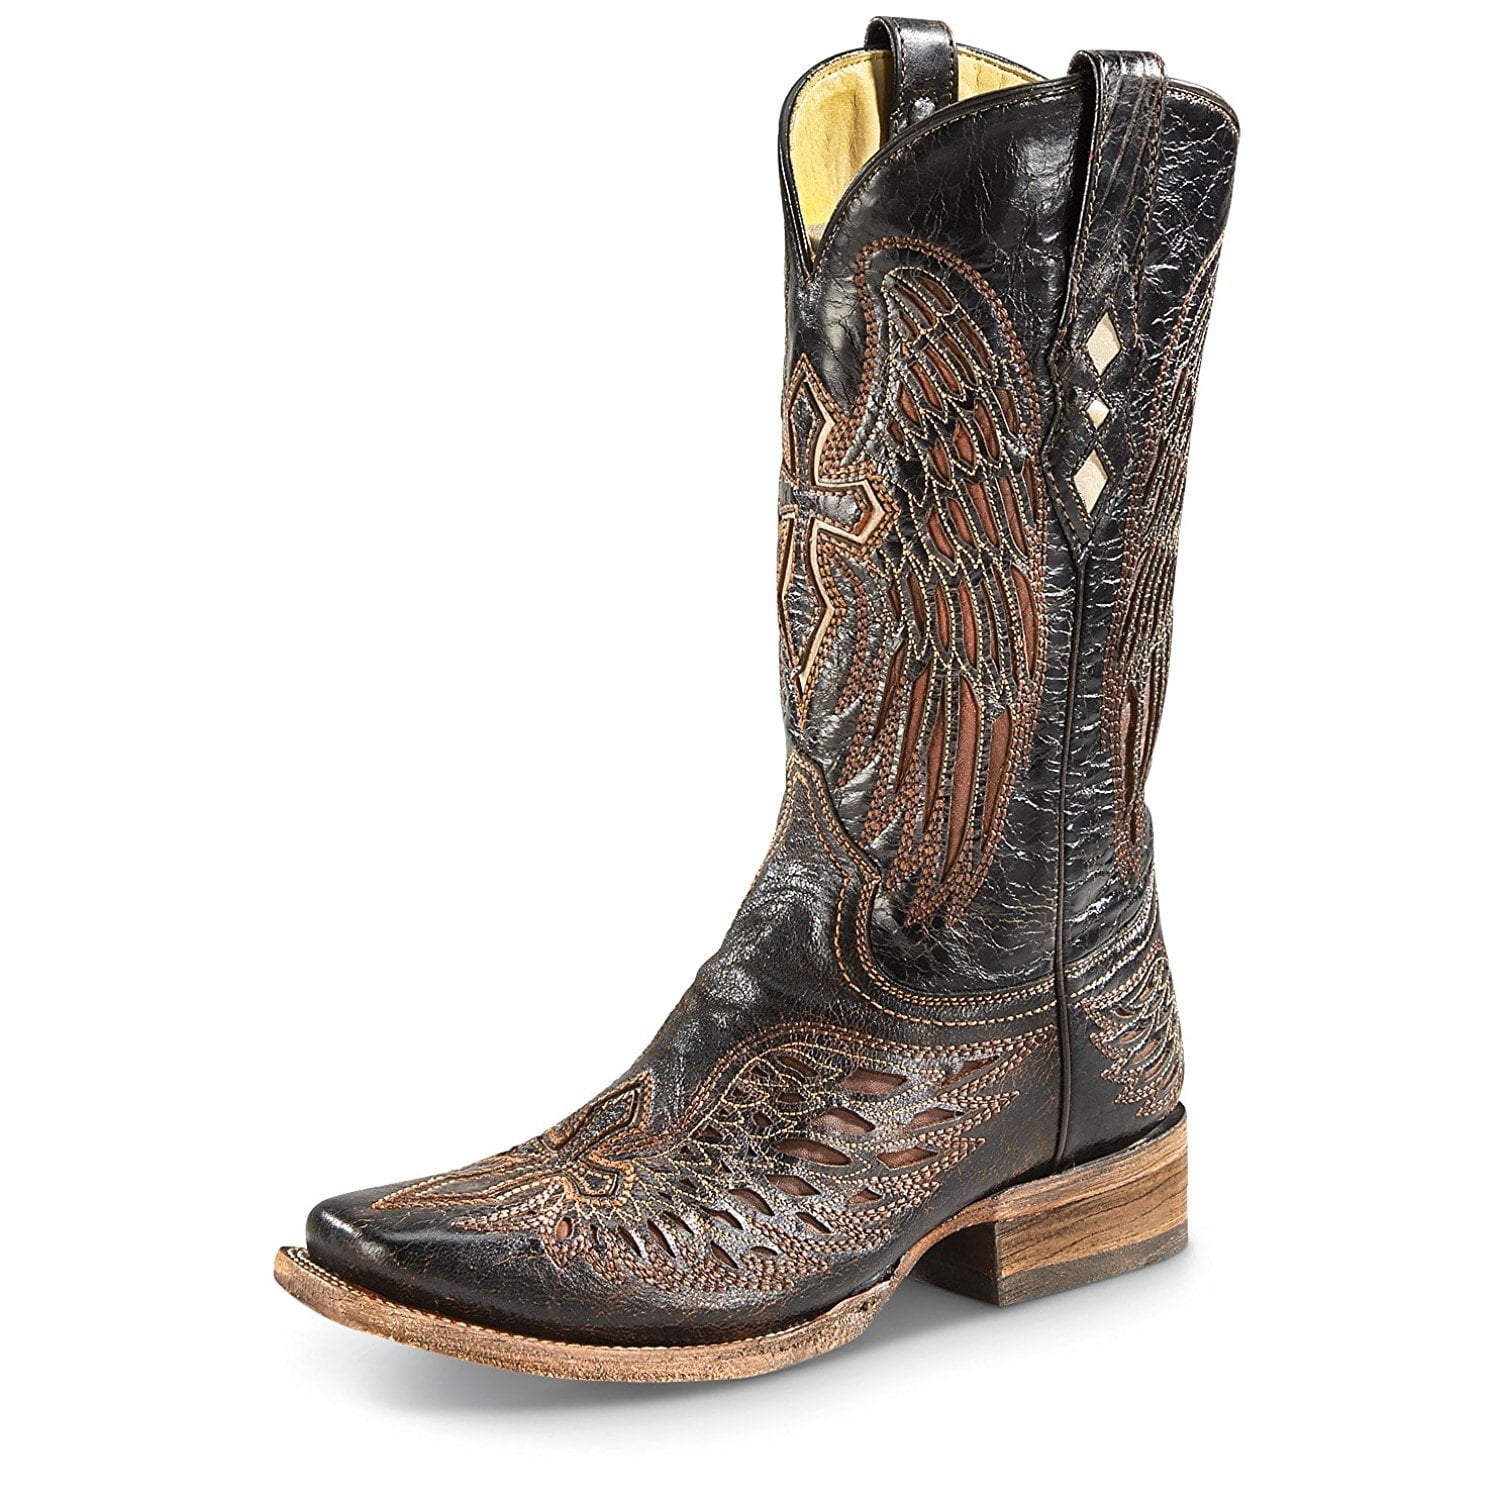 corral mens wing and cross boots